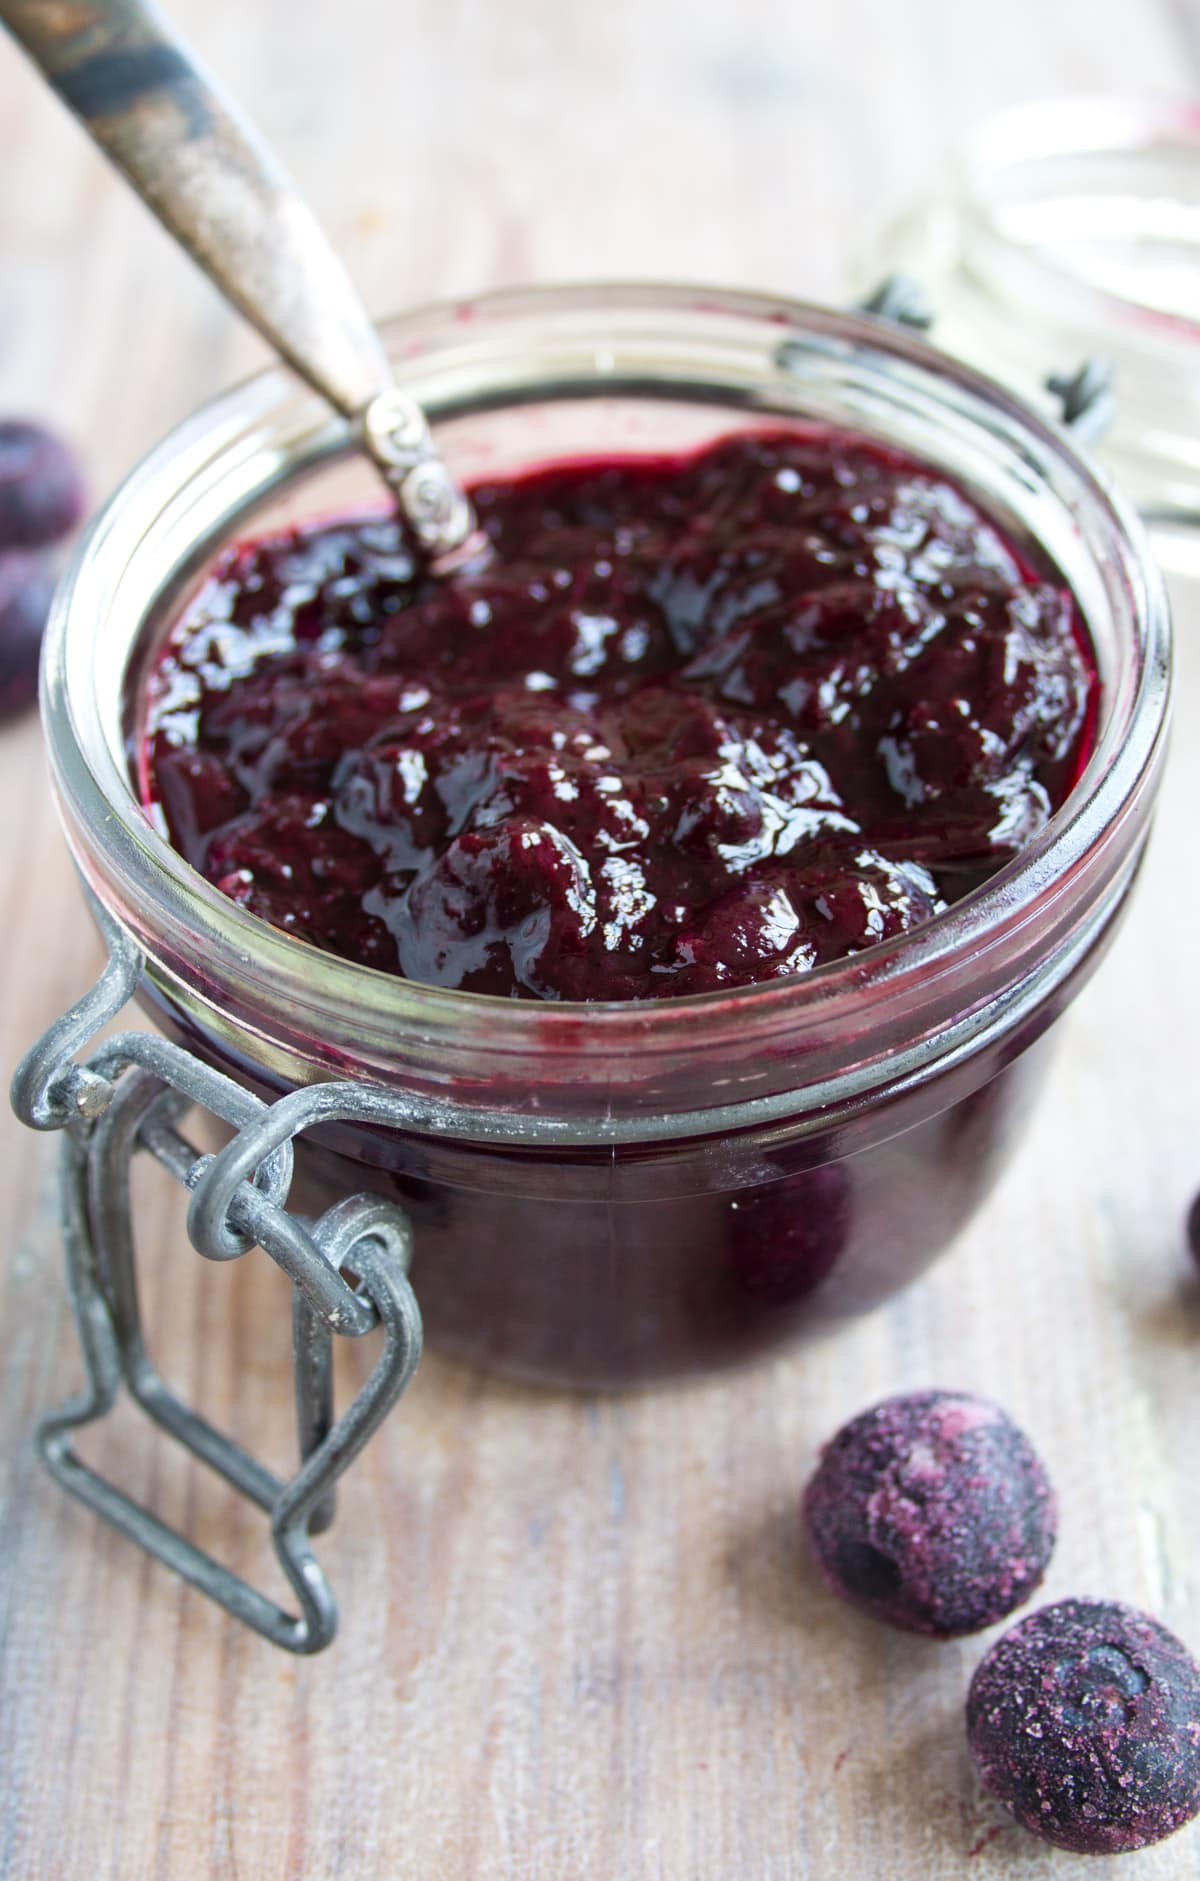 Sugar free blueberry jam in a glass jar with a spoon and blueberries.